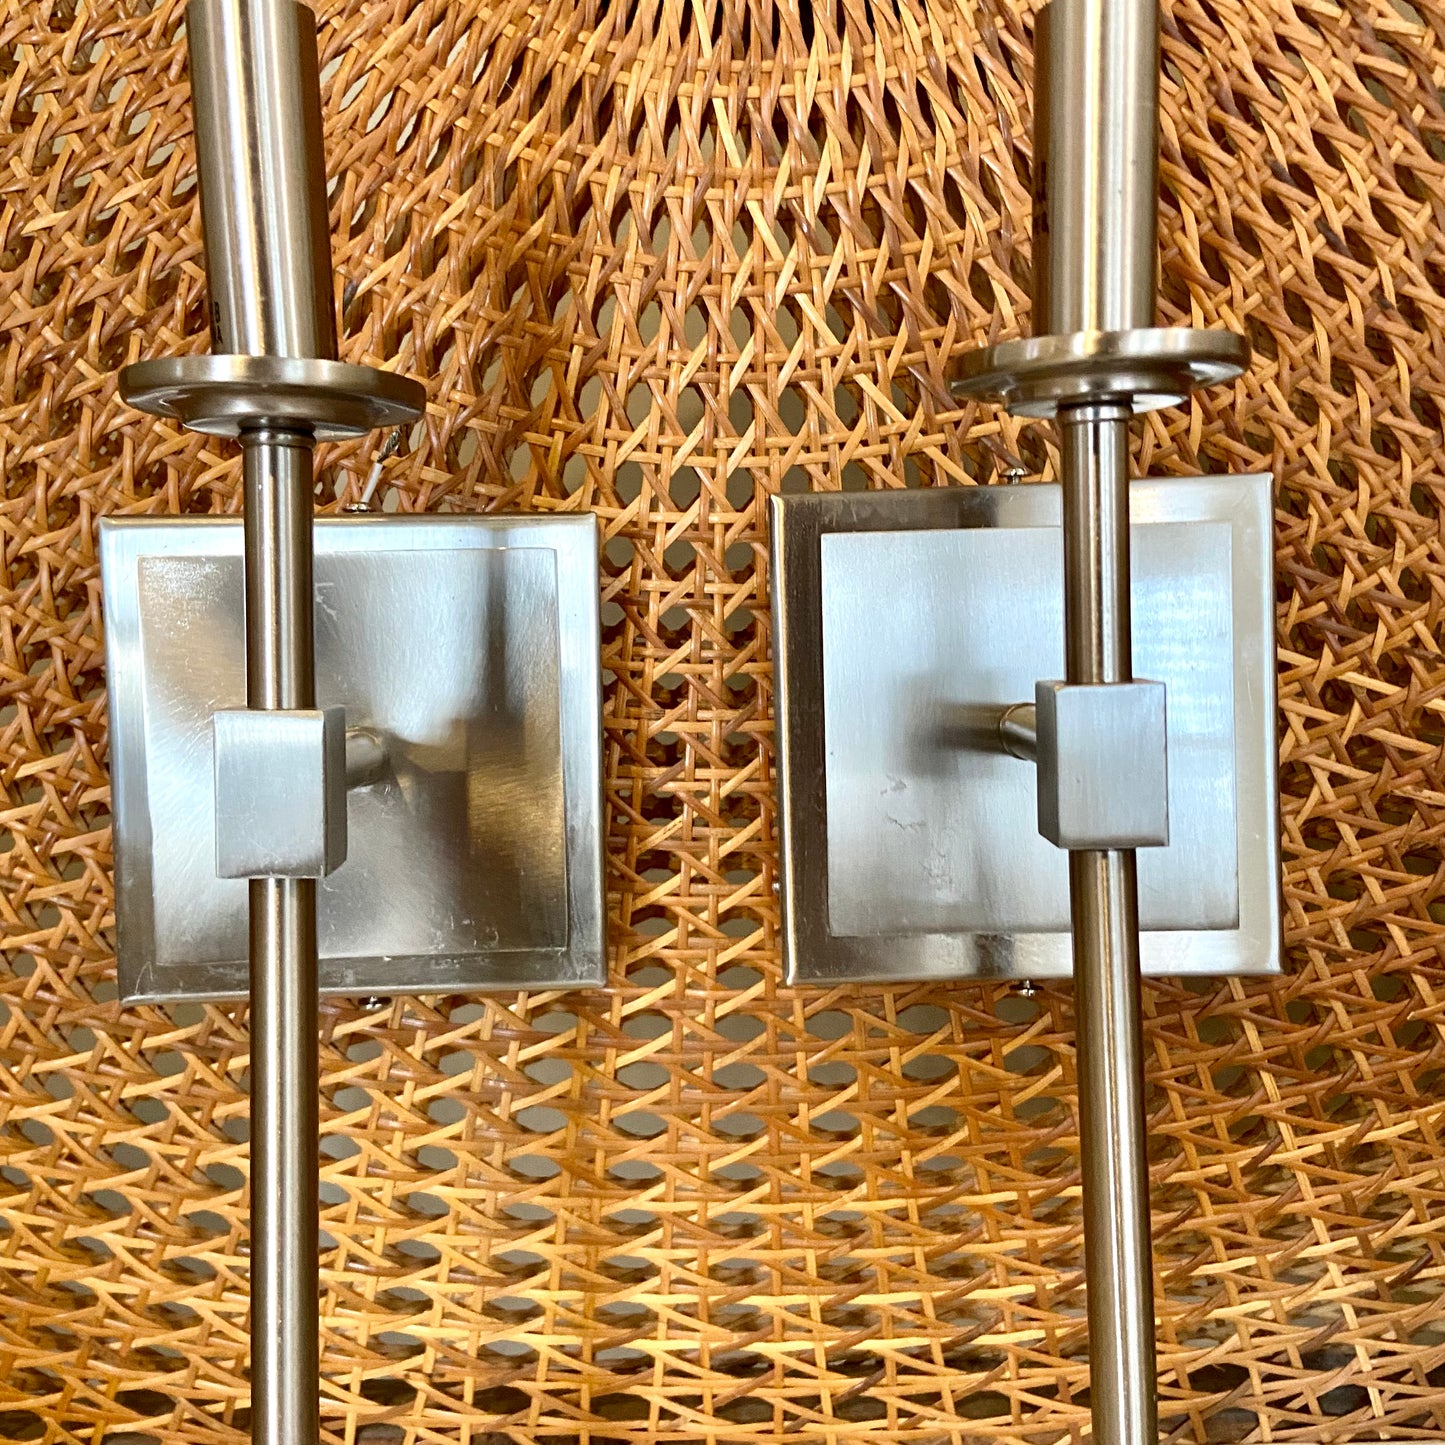 Pair brushed silver contemporary hard wired light sconces.